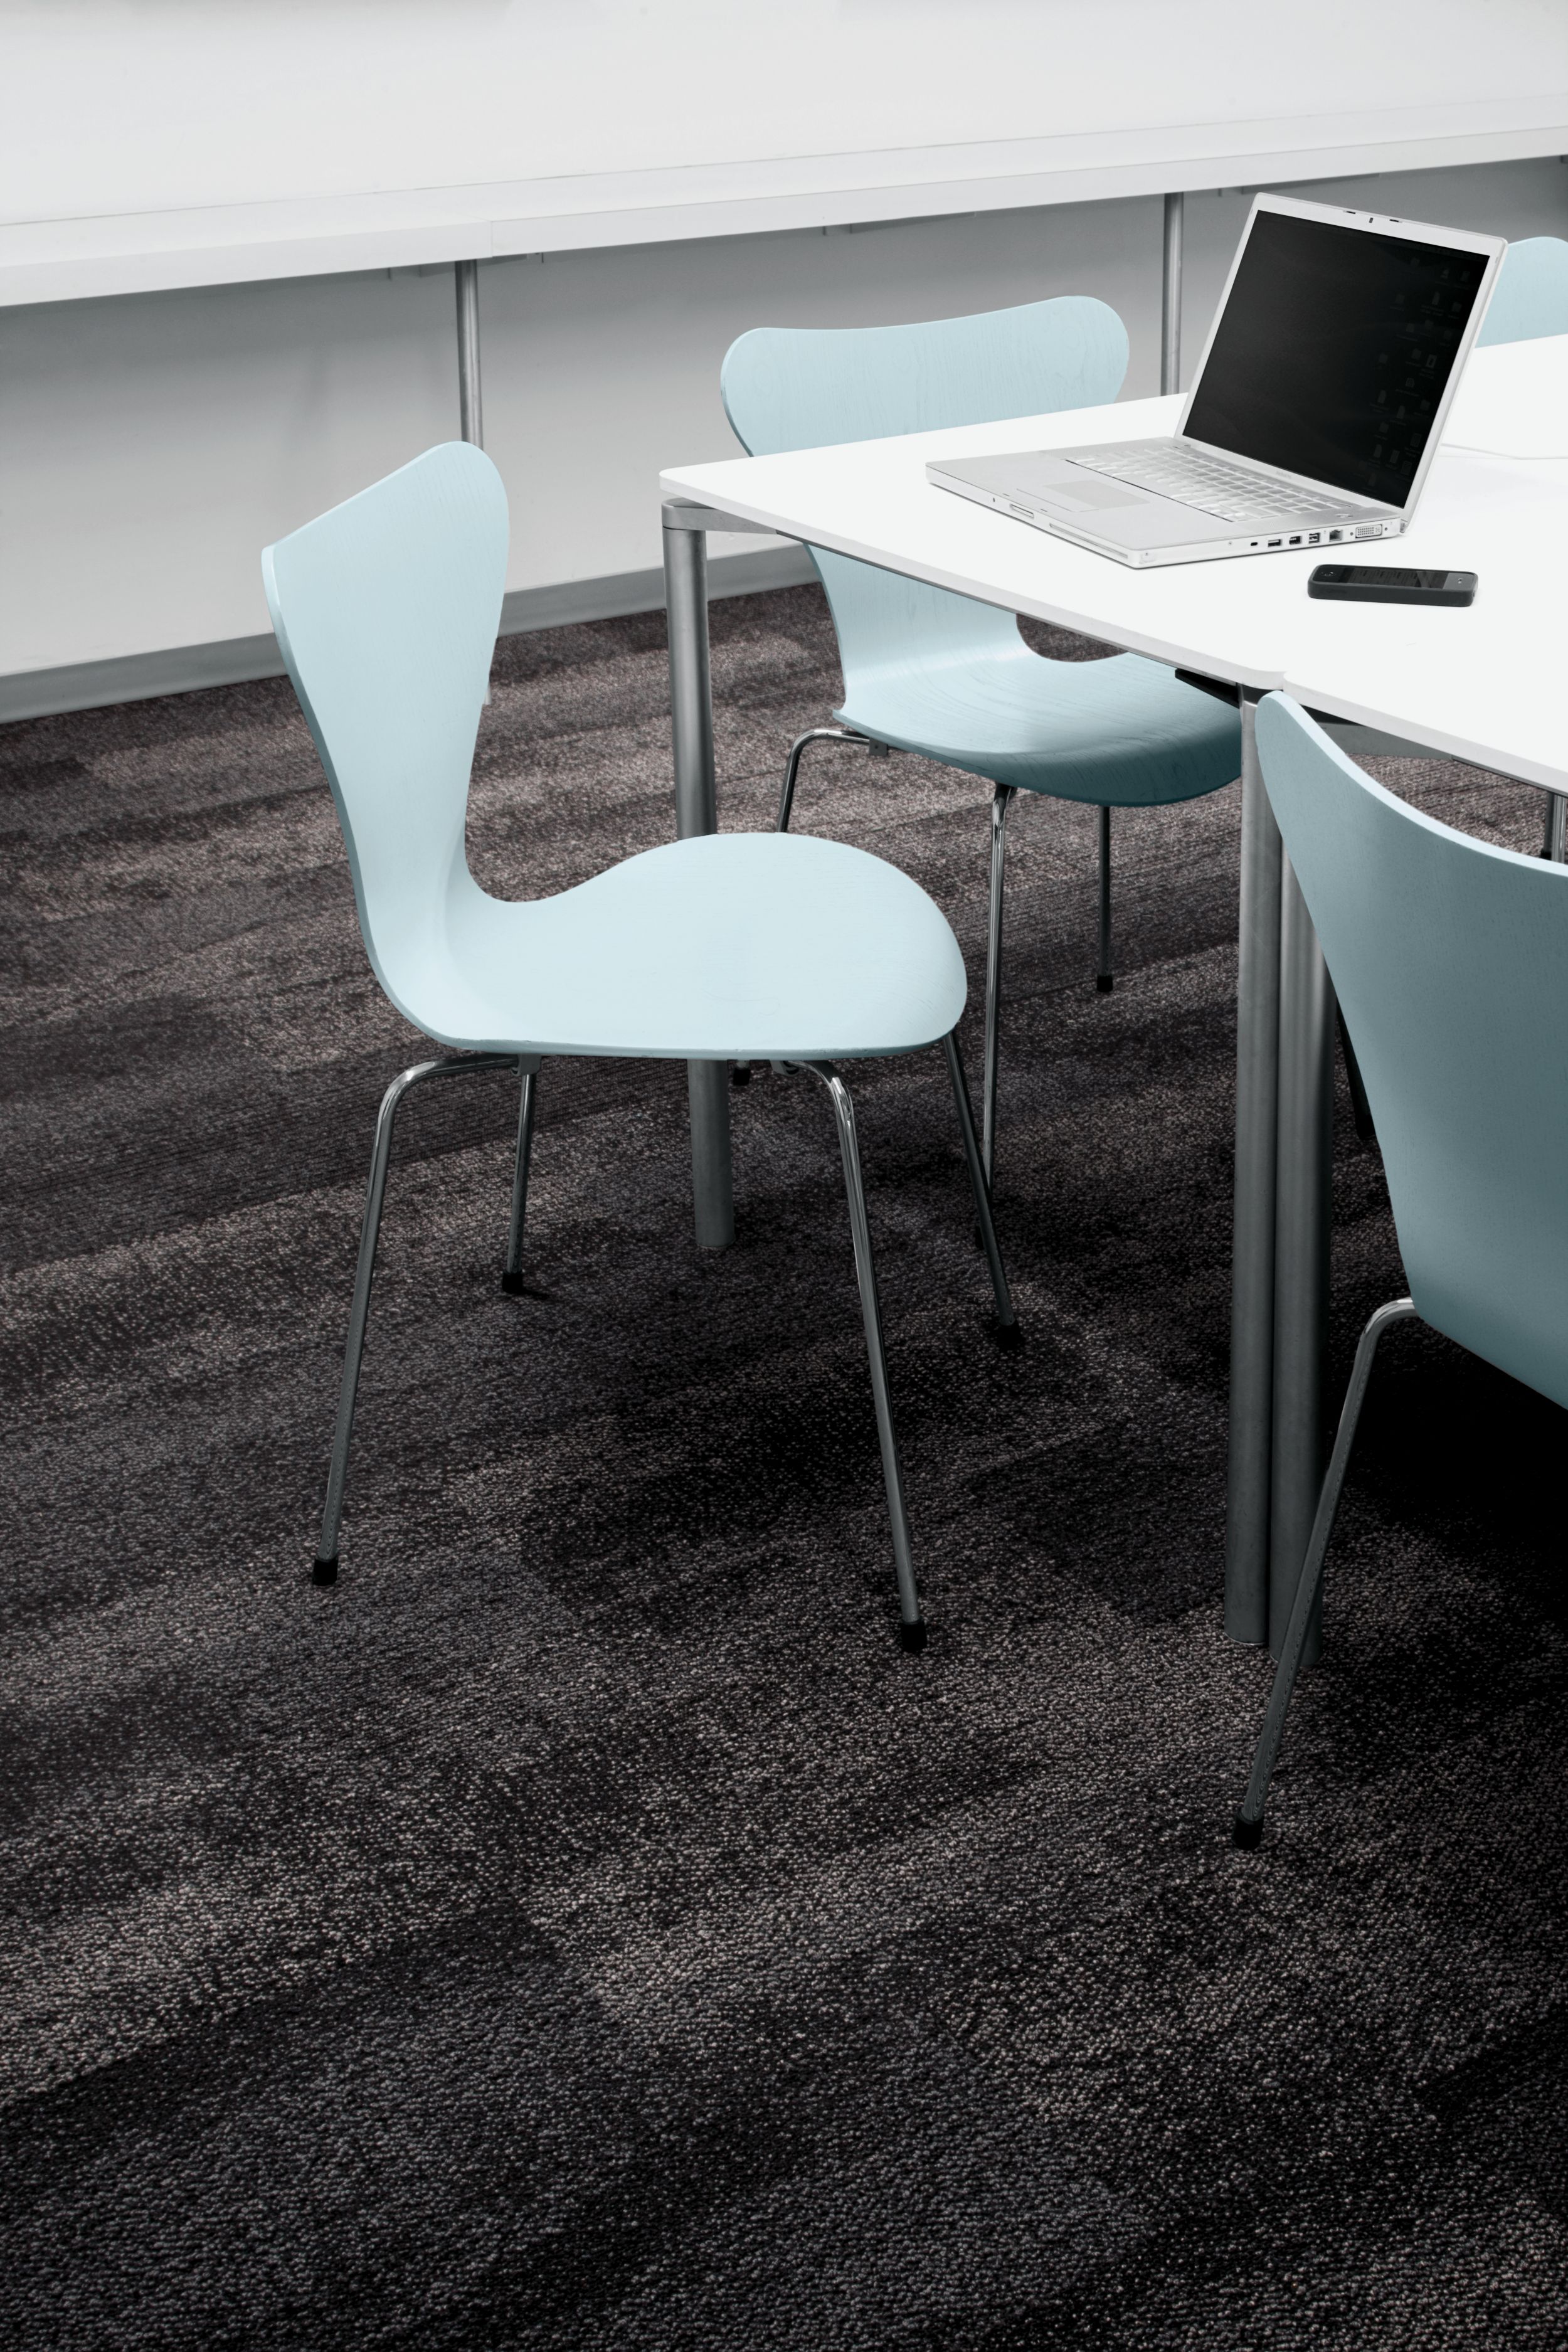 Interface Neighborhood Smooth plank carpet tile in meeting room or classroom with laptop and light blue chairs image number 1